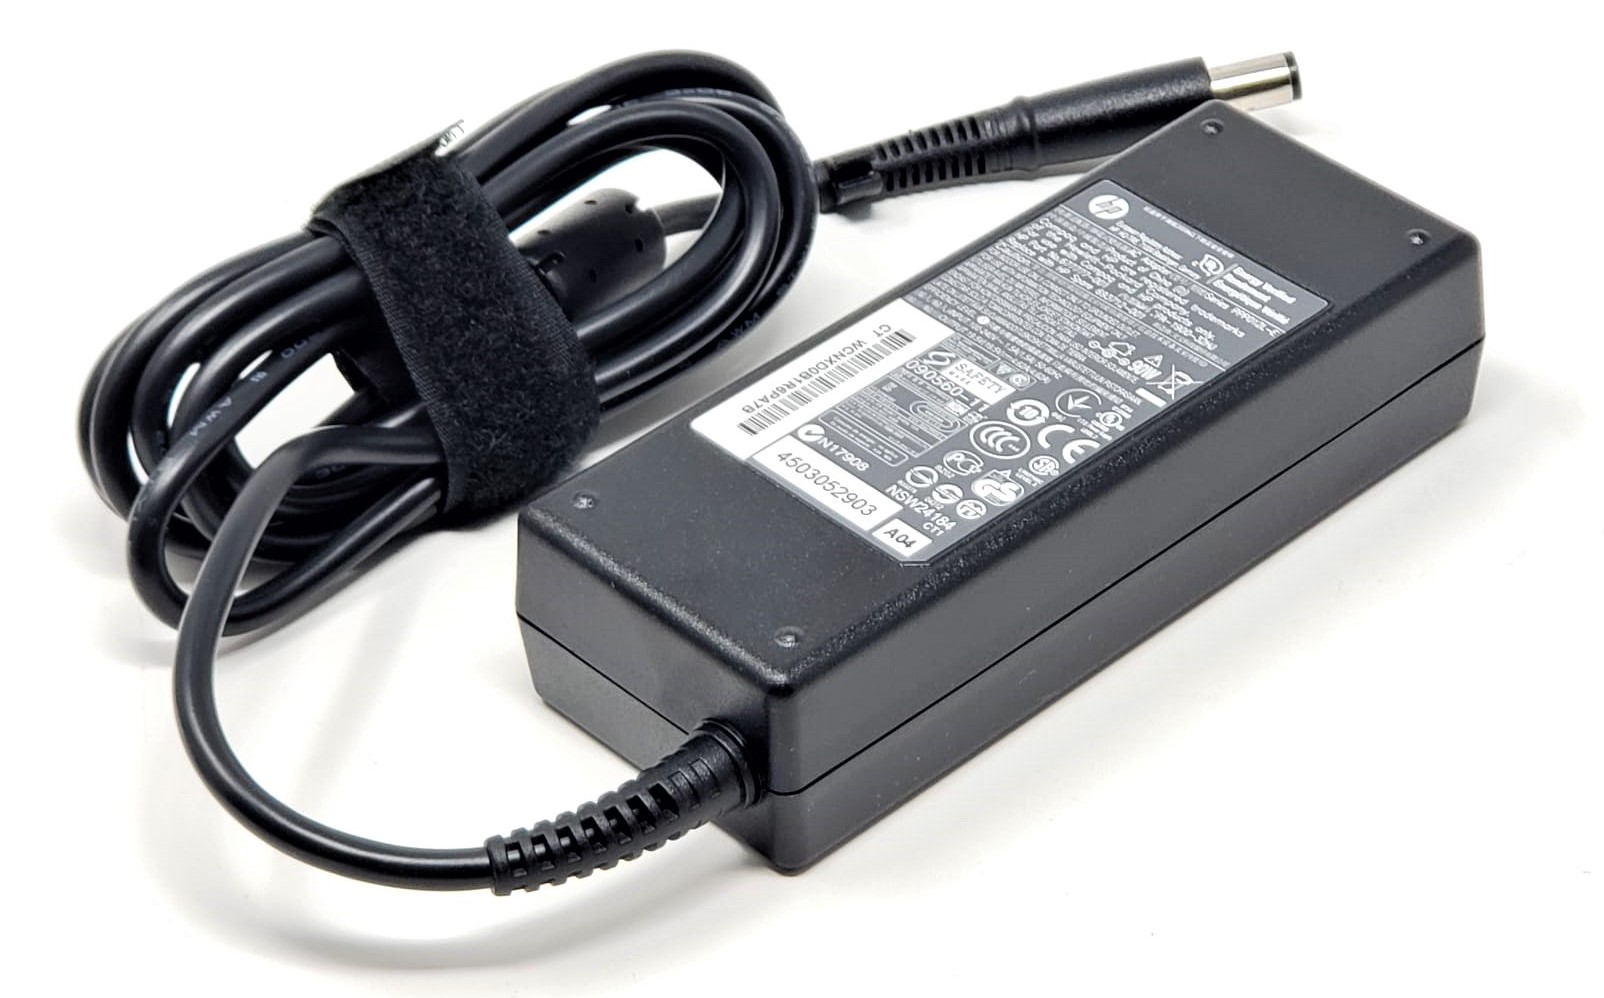 HP 608428-002 - 90W 19.5V 4.62A 5.0mm Tip AC Adapter Charger for HP